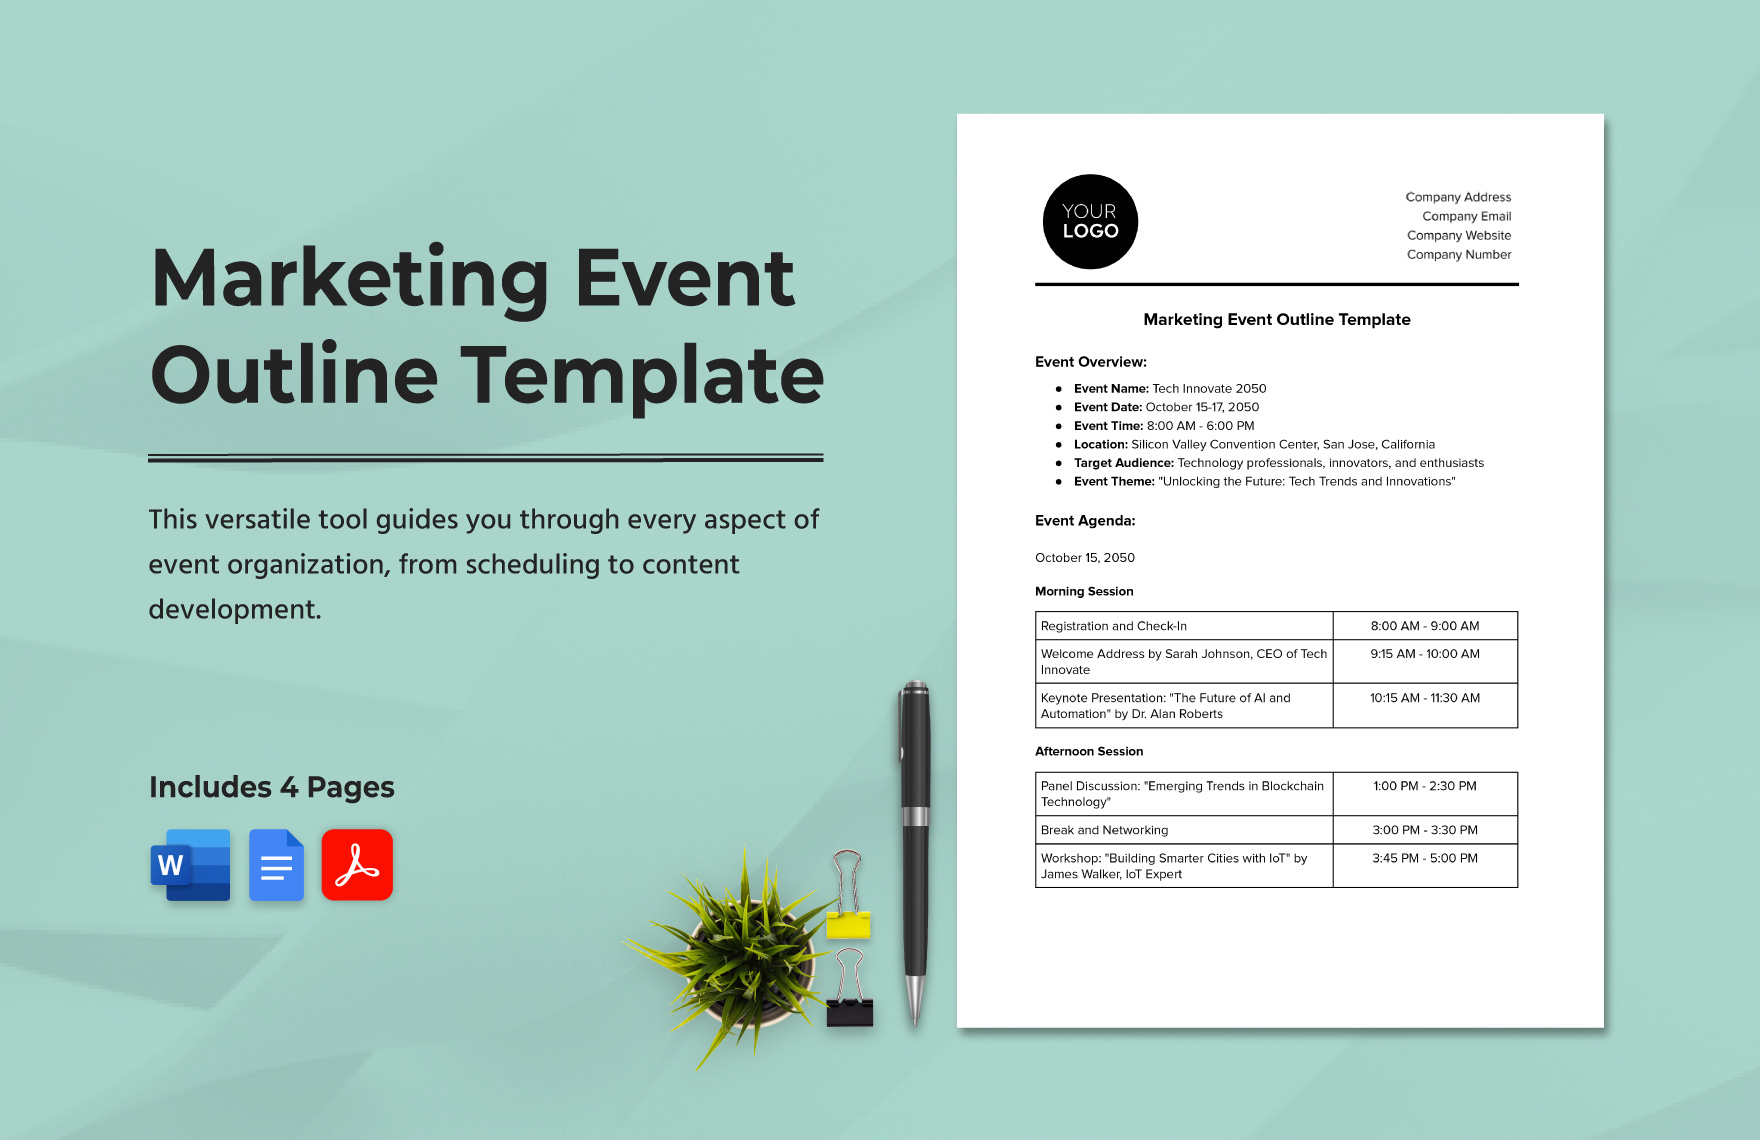 Marketing Event Outline Template